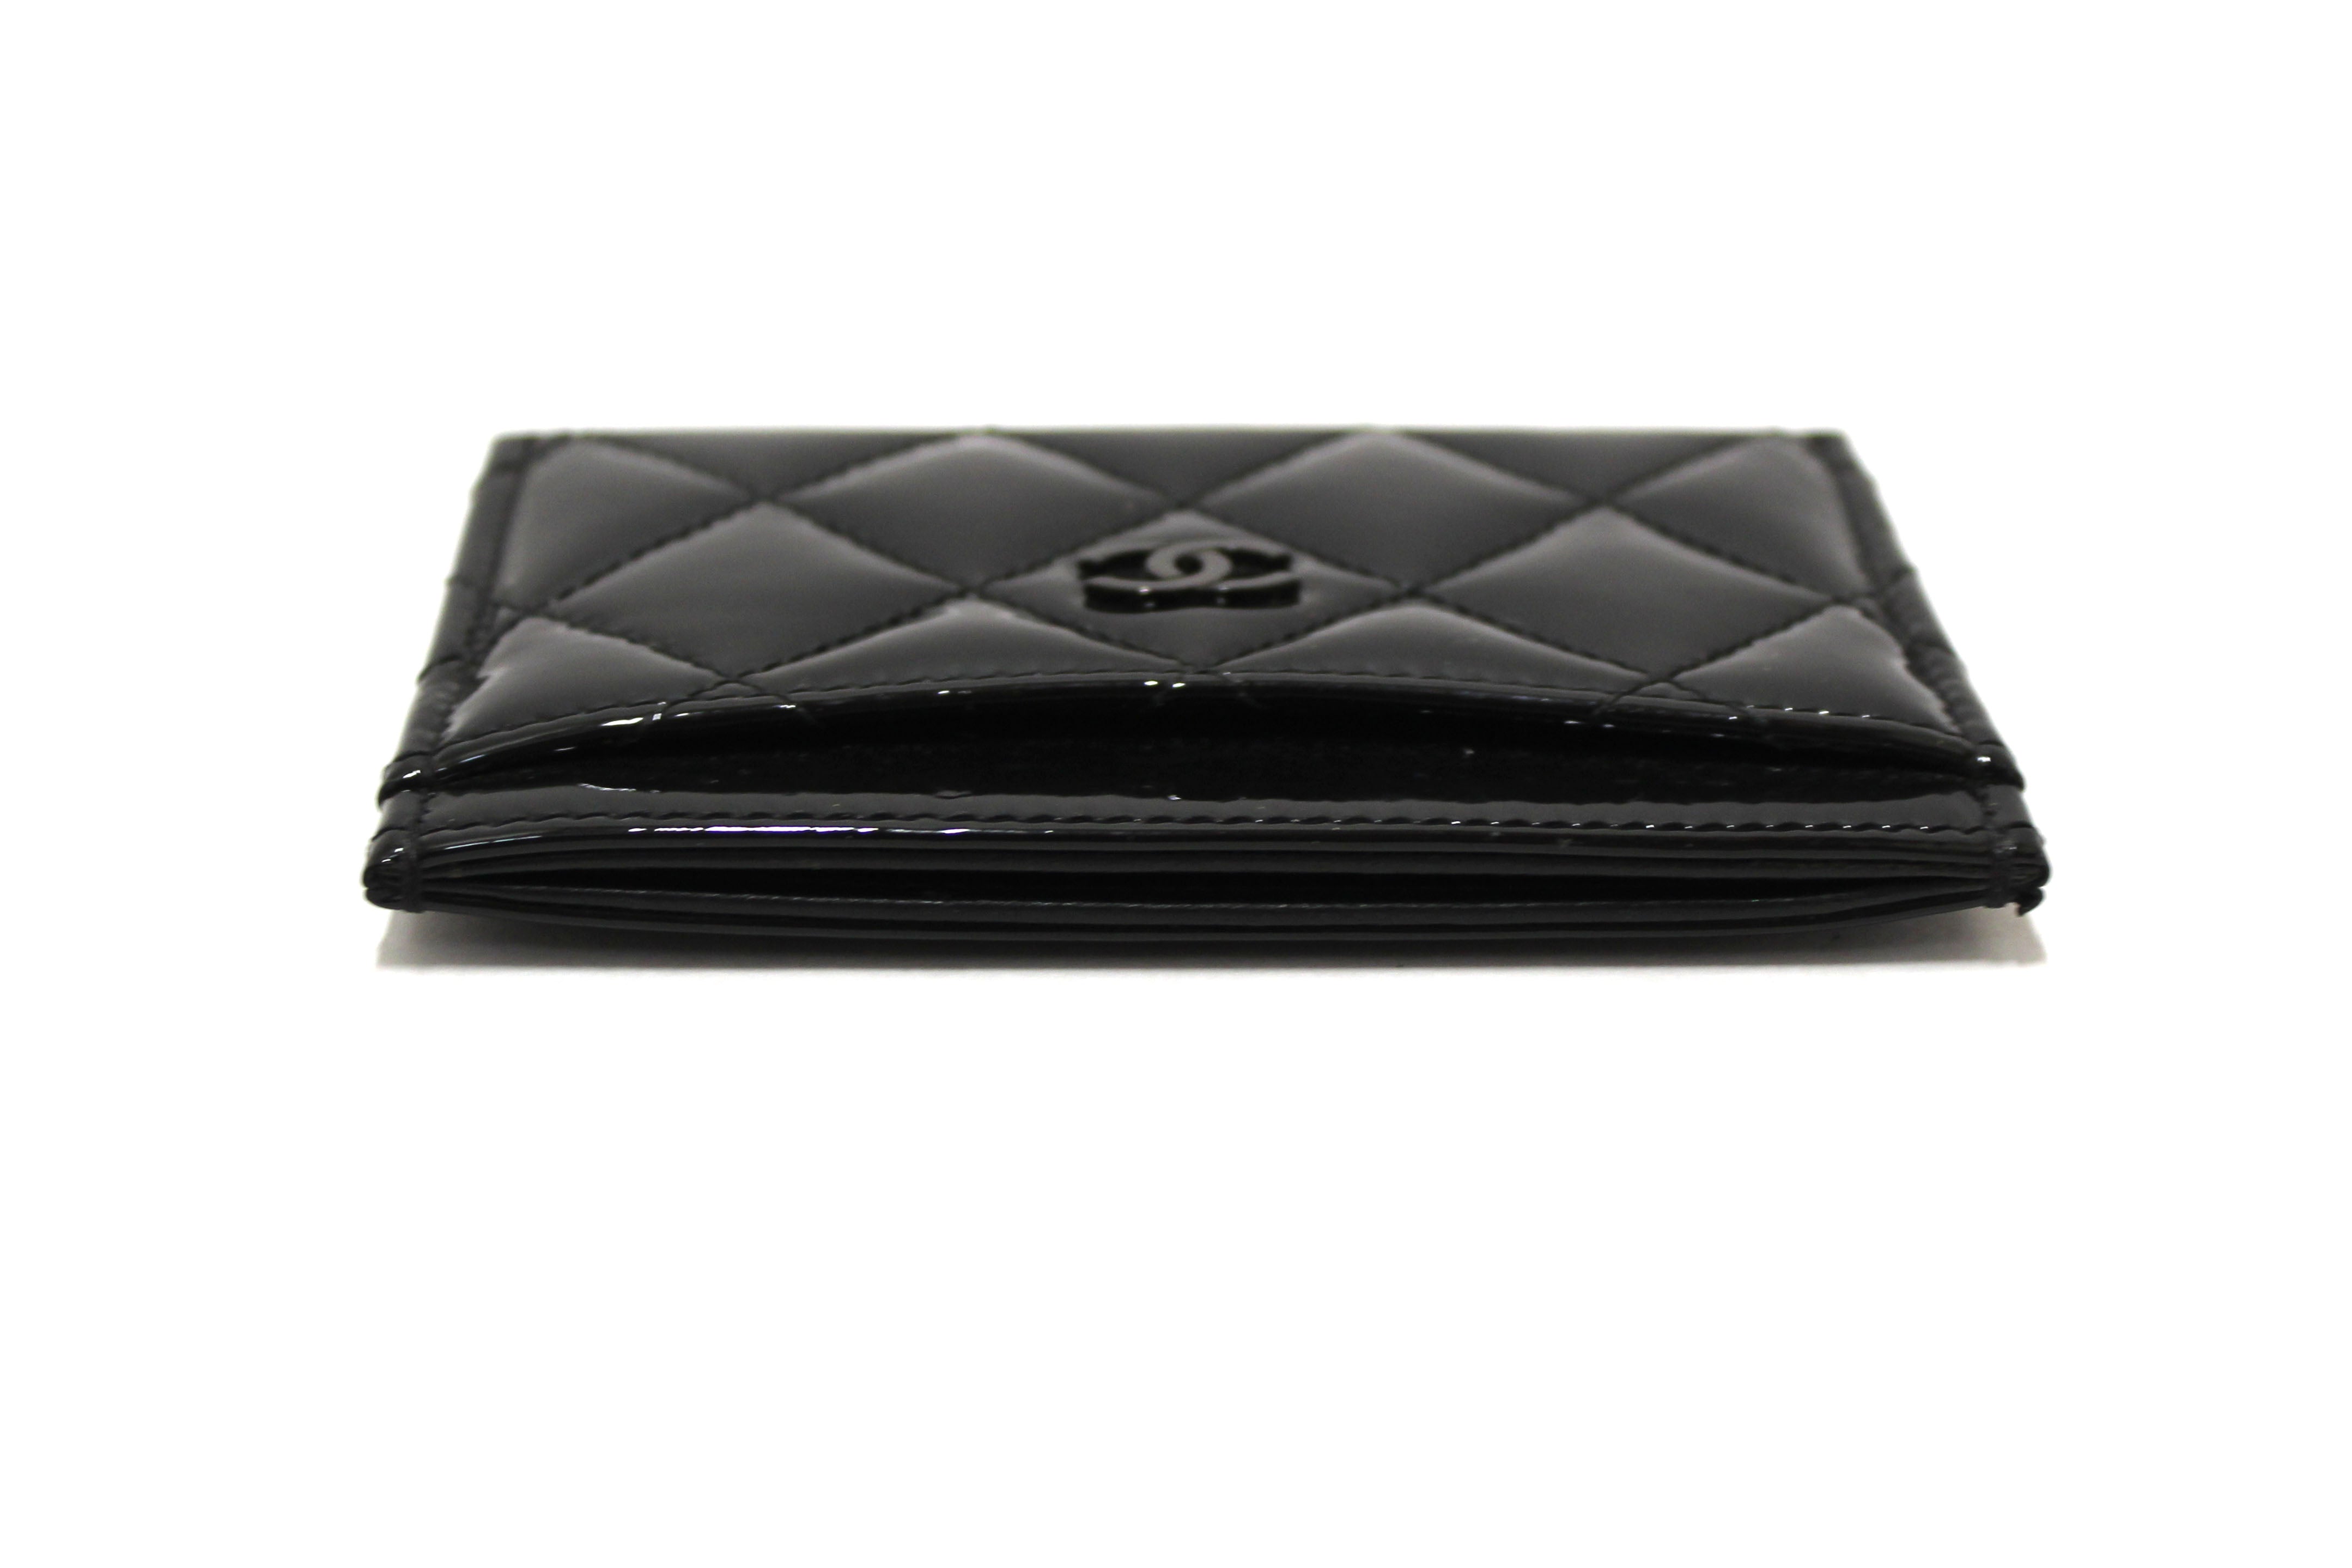 Authentic Chanel Black Quilted Patent Leather Leather Card Holder